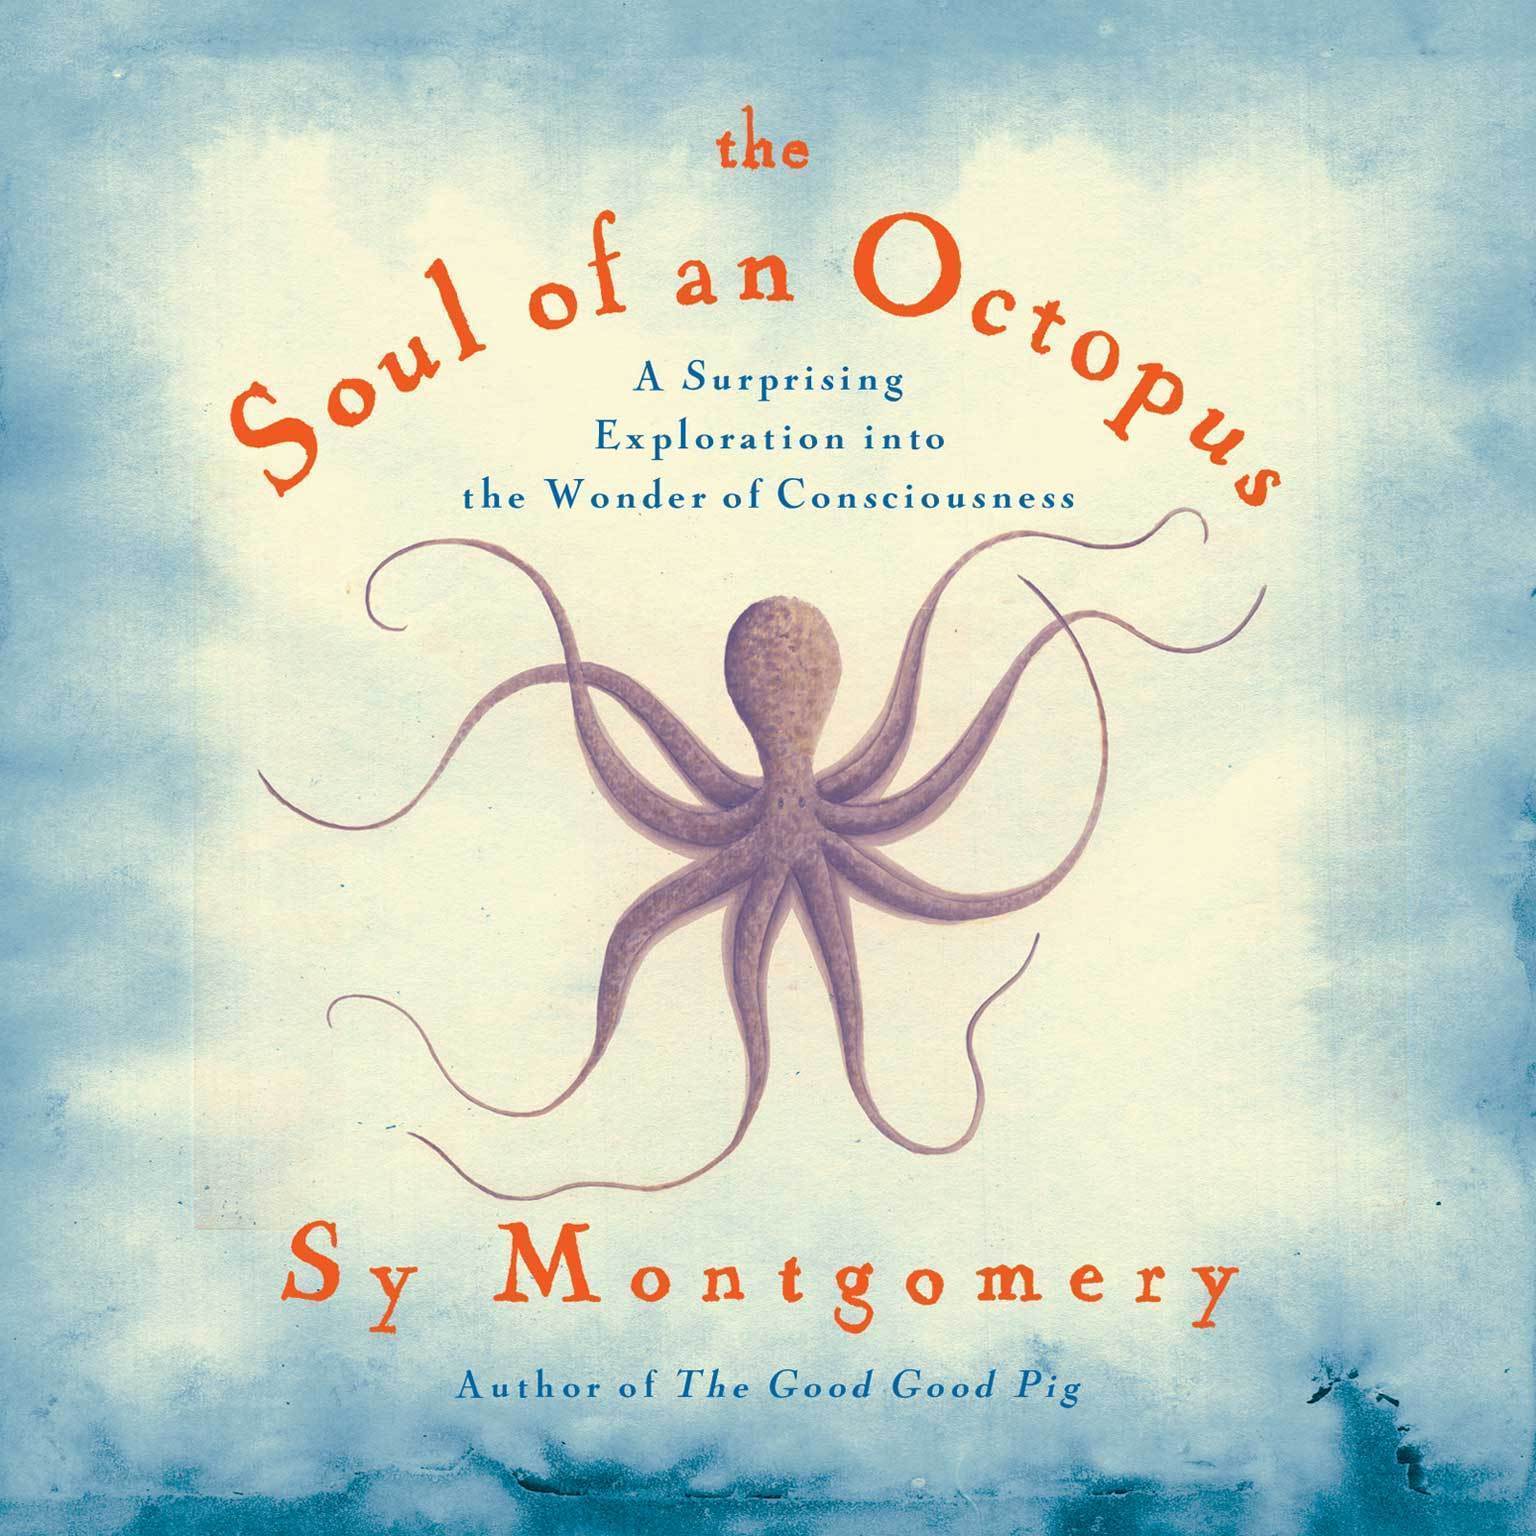 The Soul of an Octopus book by Sy Montgomer